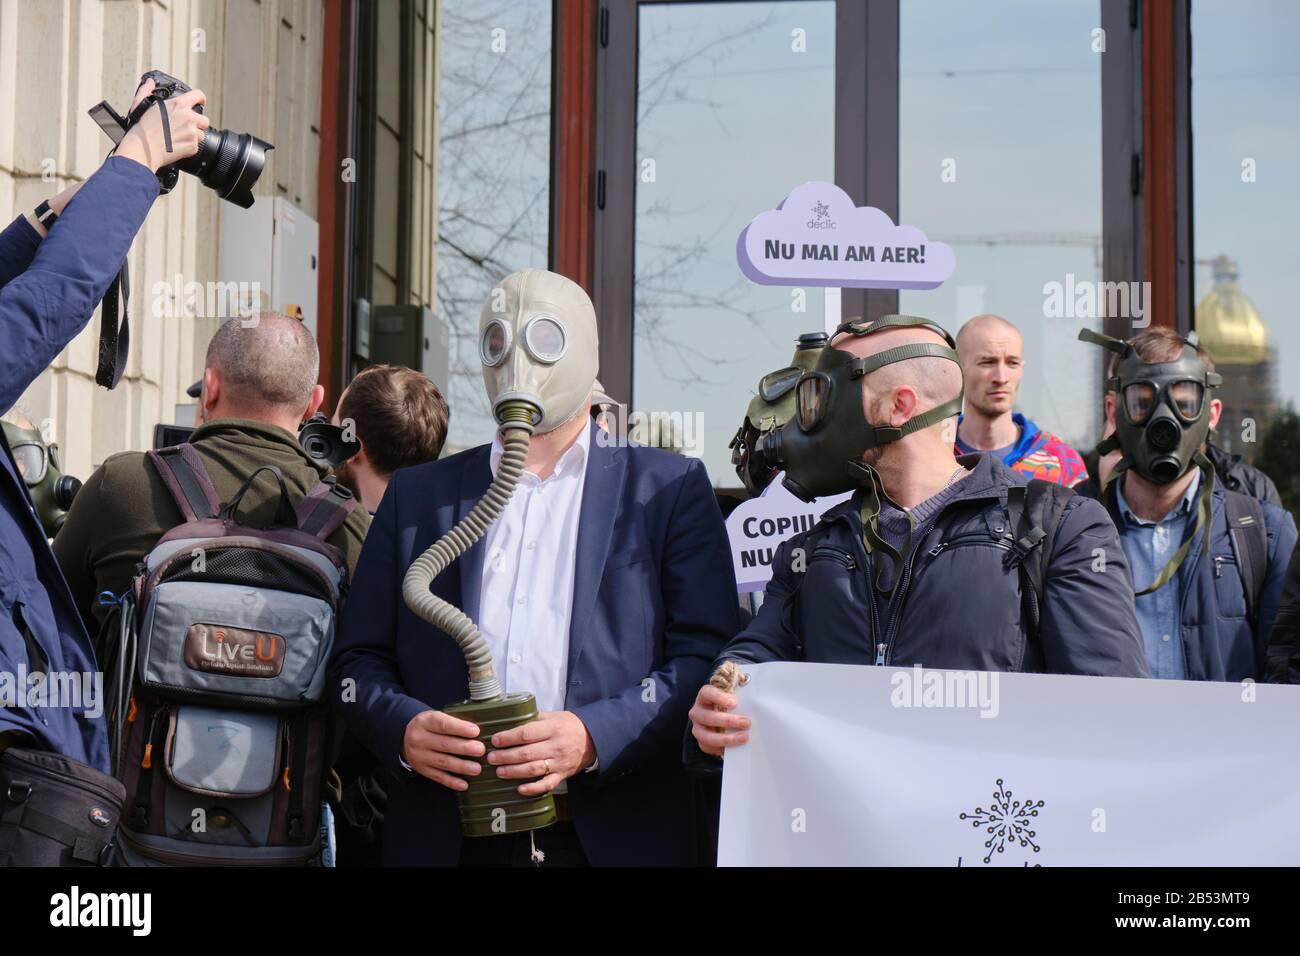 Bucharest, Romania - March 4, 2020: Protesters wear gas masks in response to extreme air pollution, during a protest in front of the Ministry of Envir Stock Photo